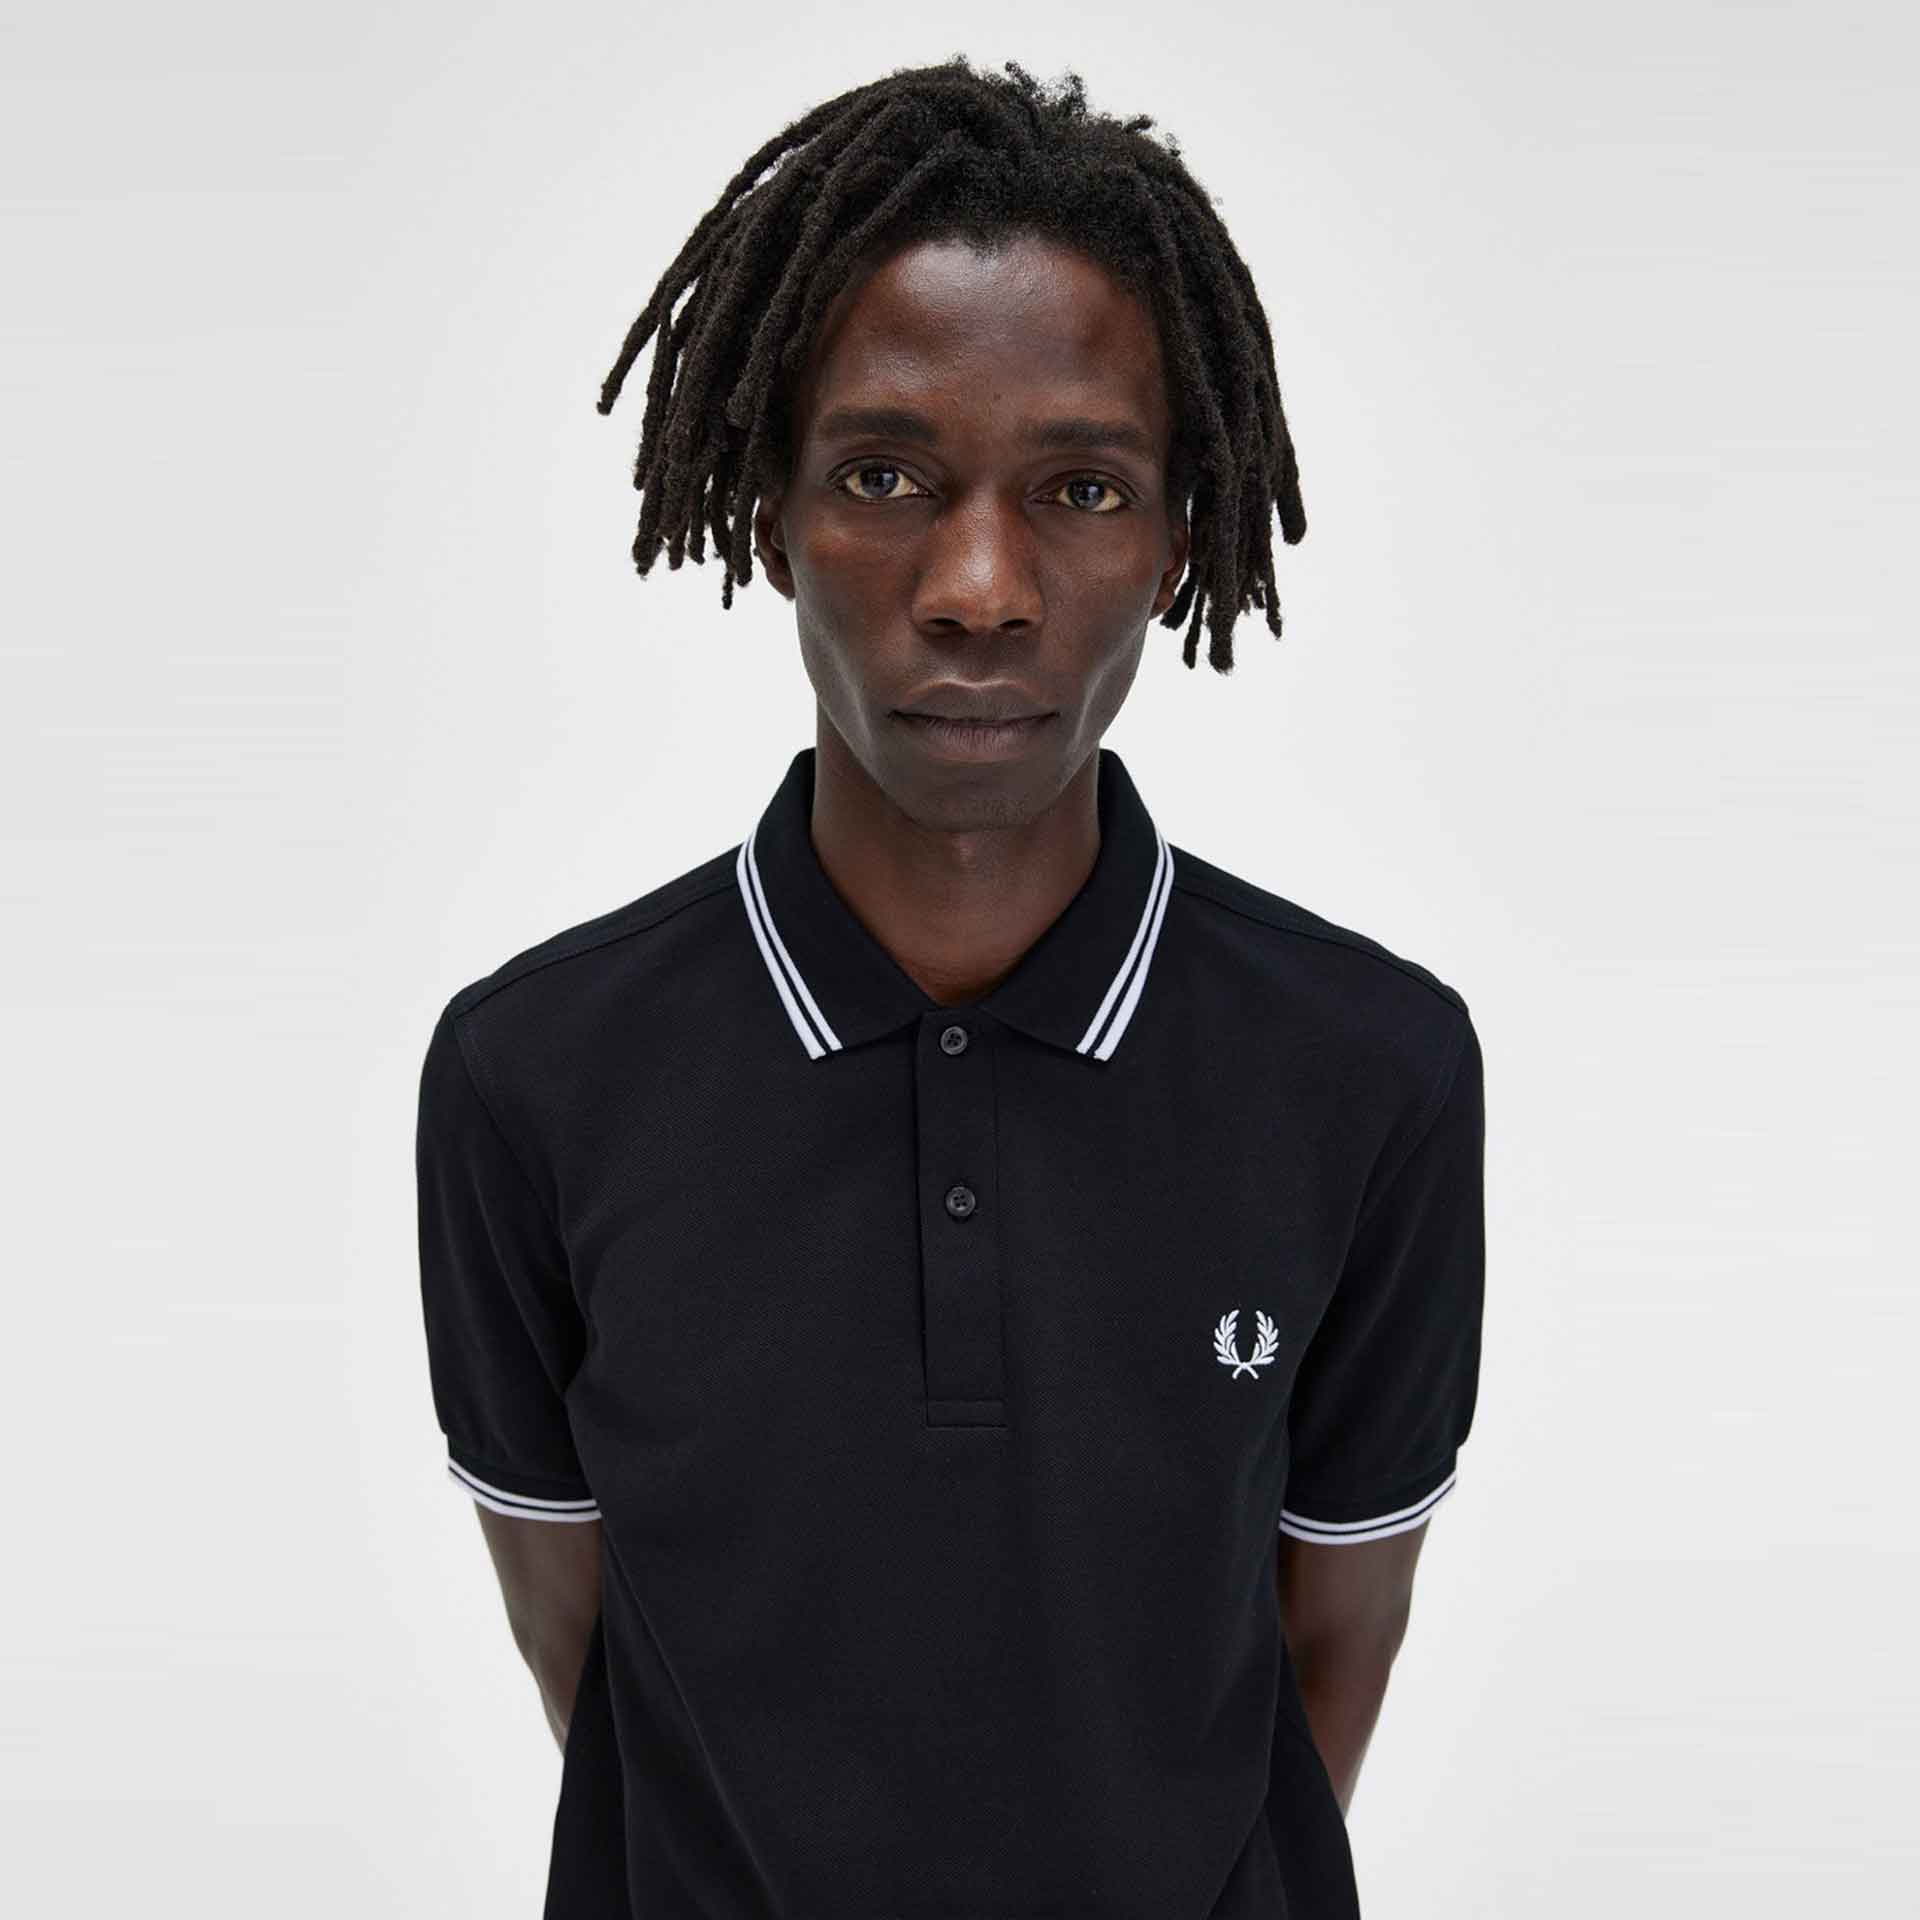 Fred Perry Twin Tipped Polo Shirt Black